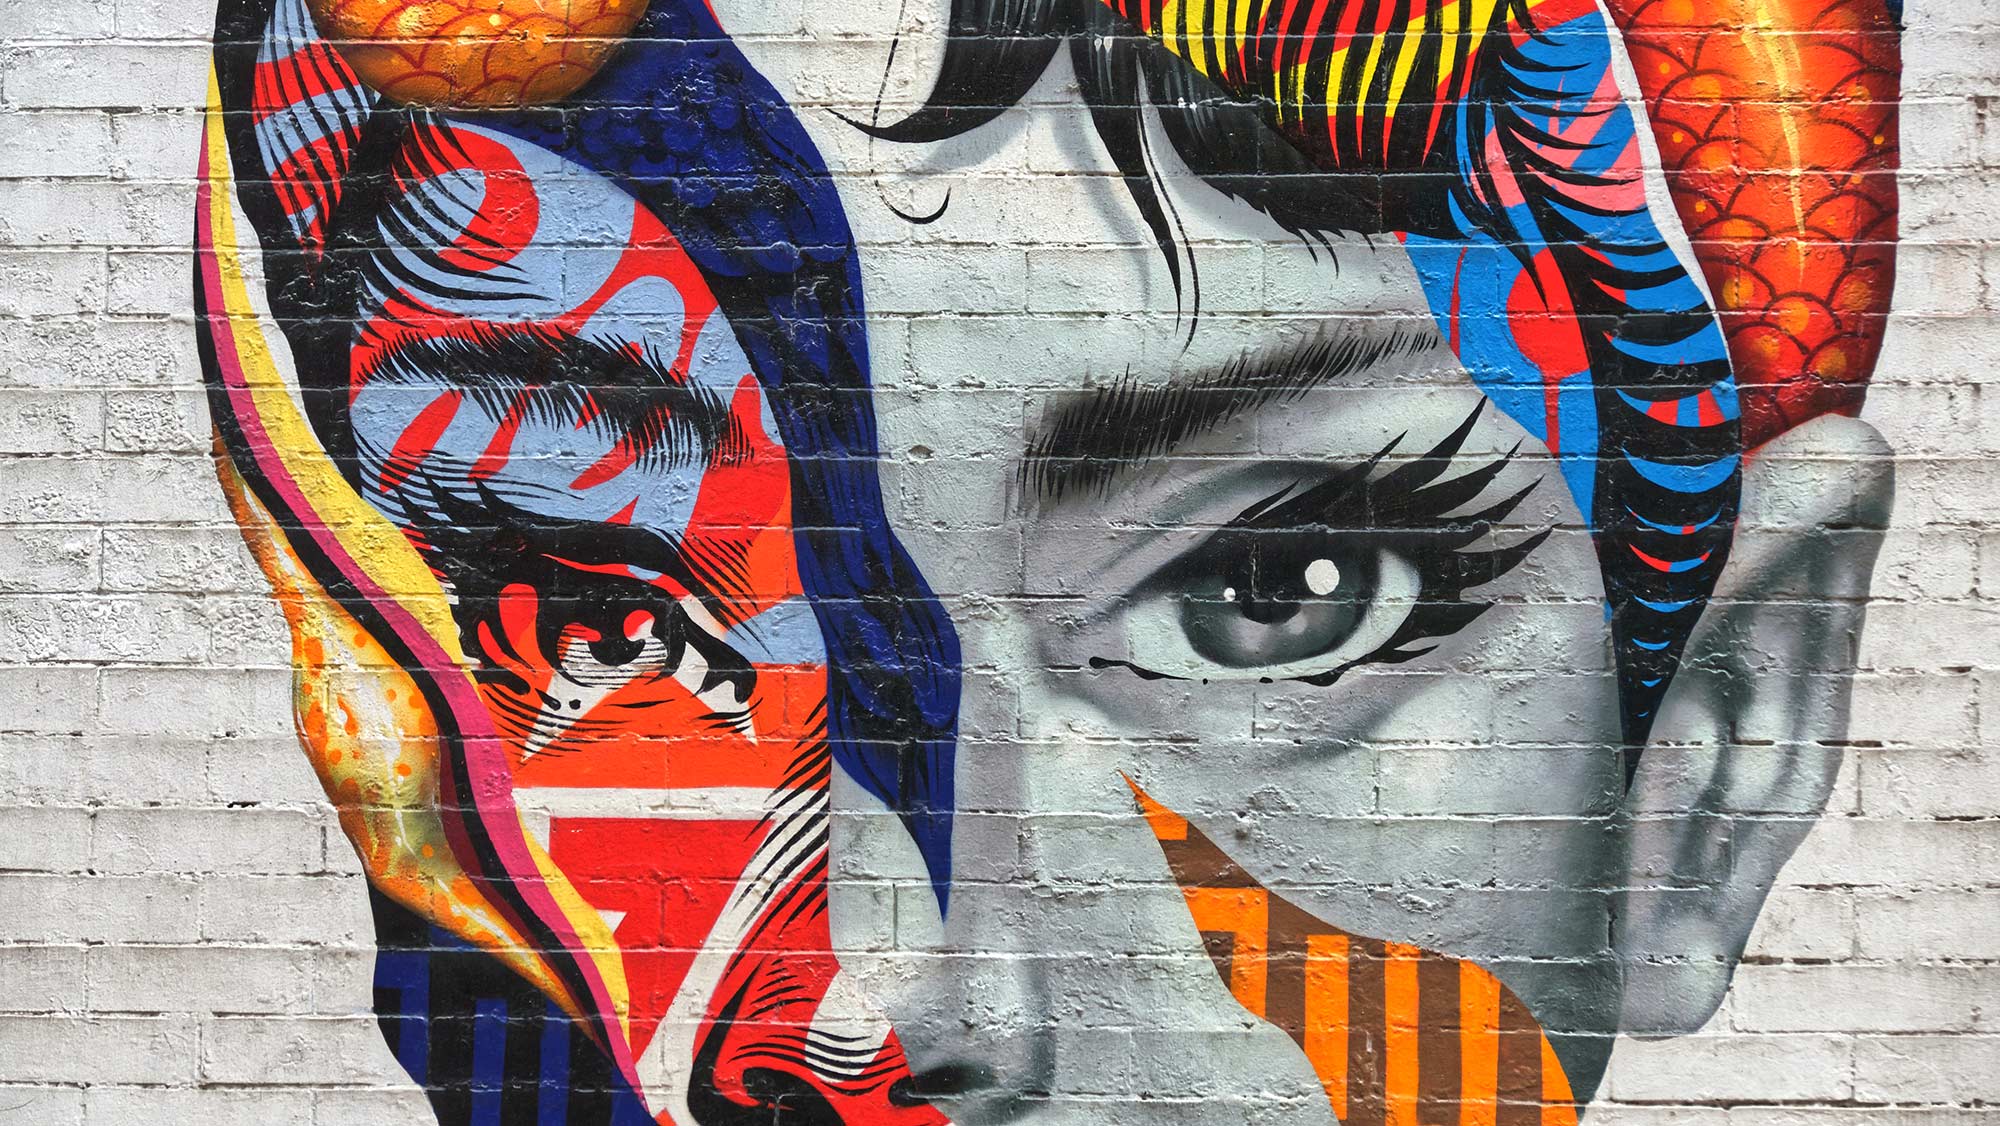 These Are the 10 Best Street Art Cities in the World